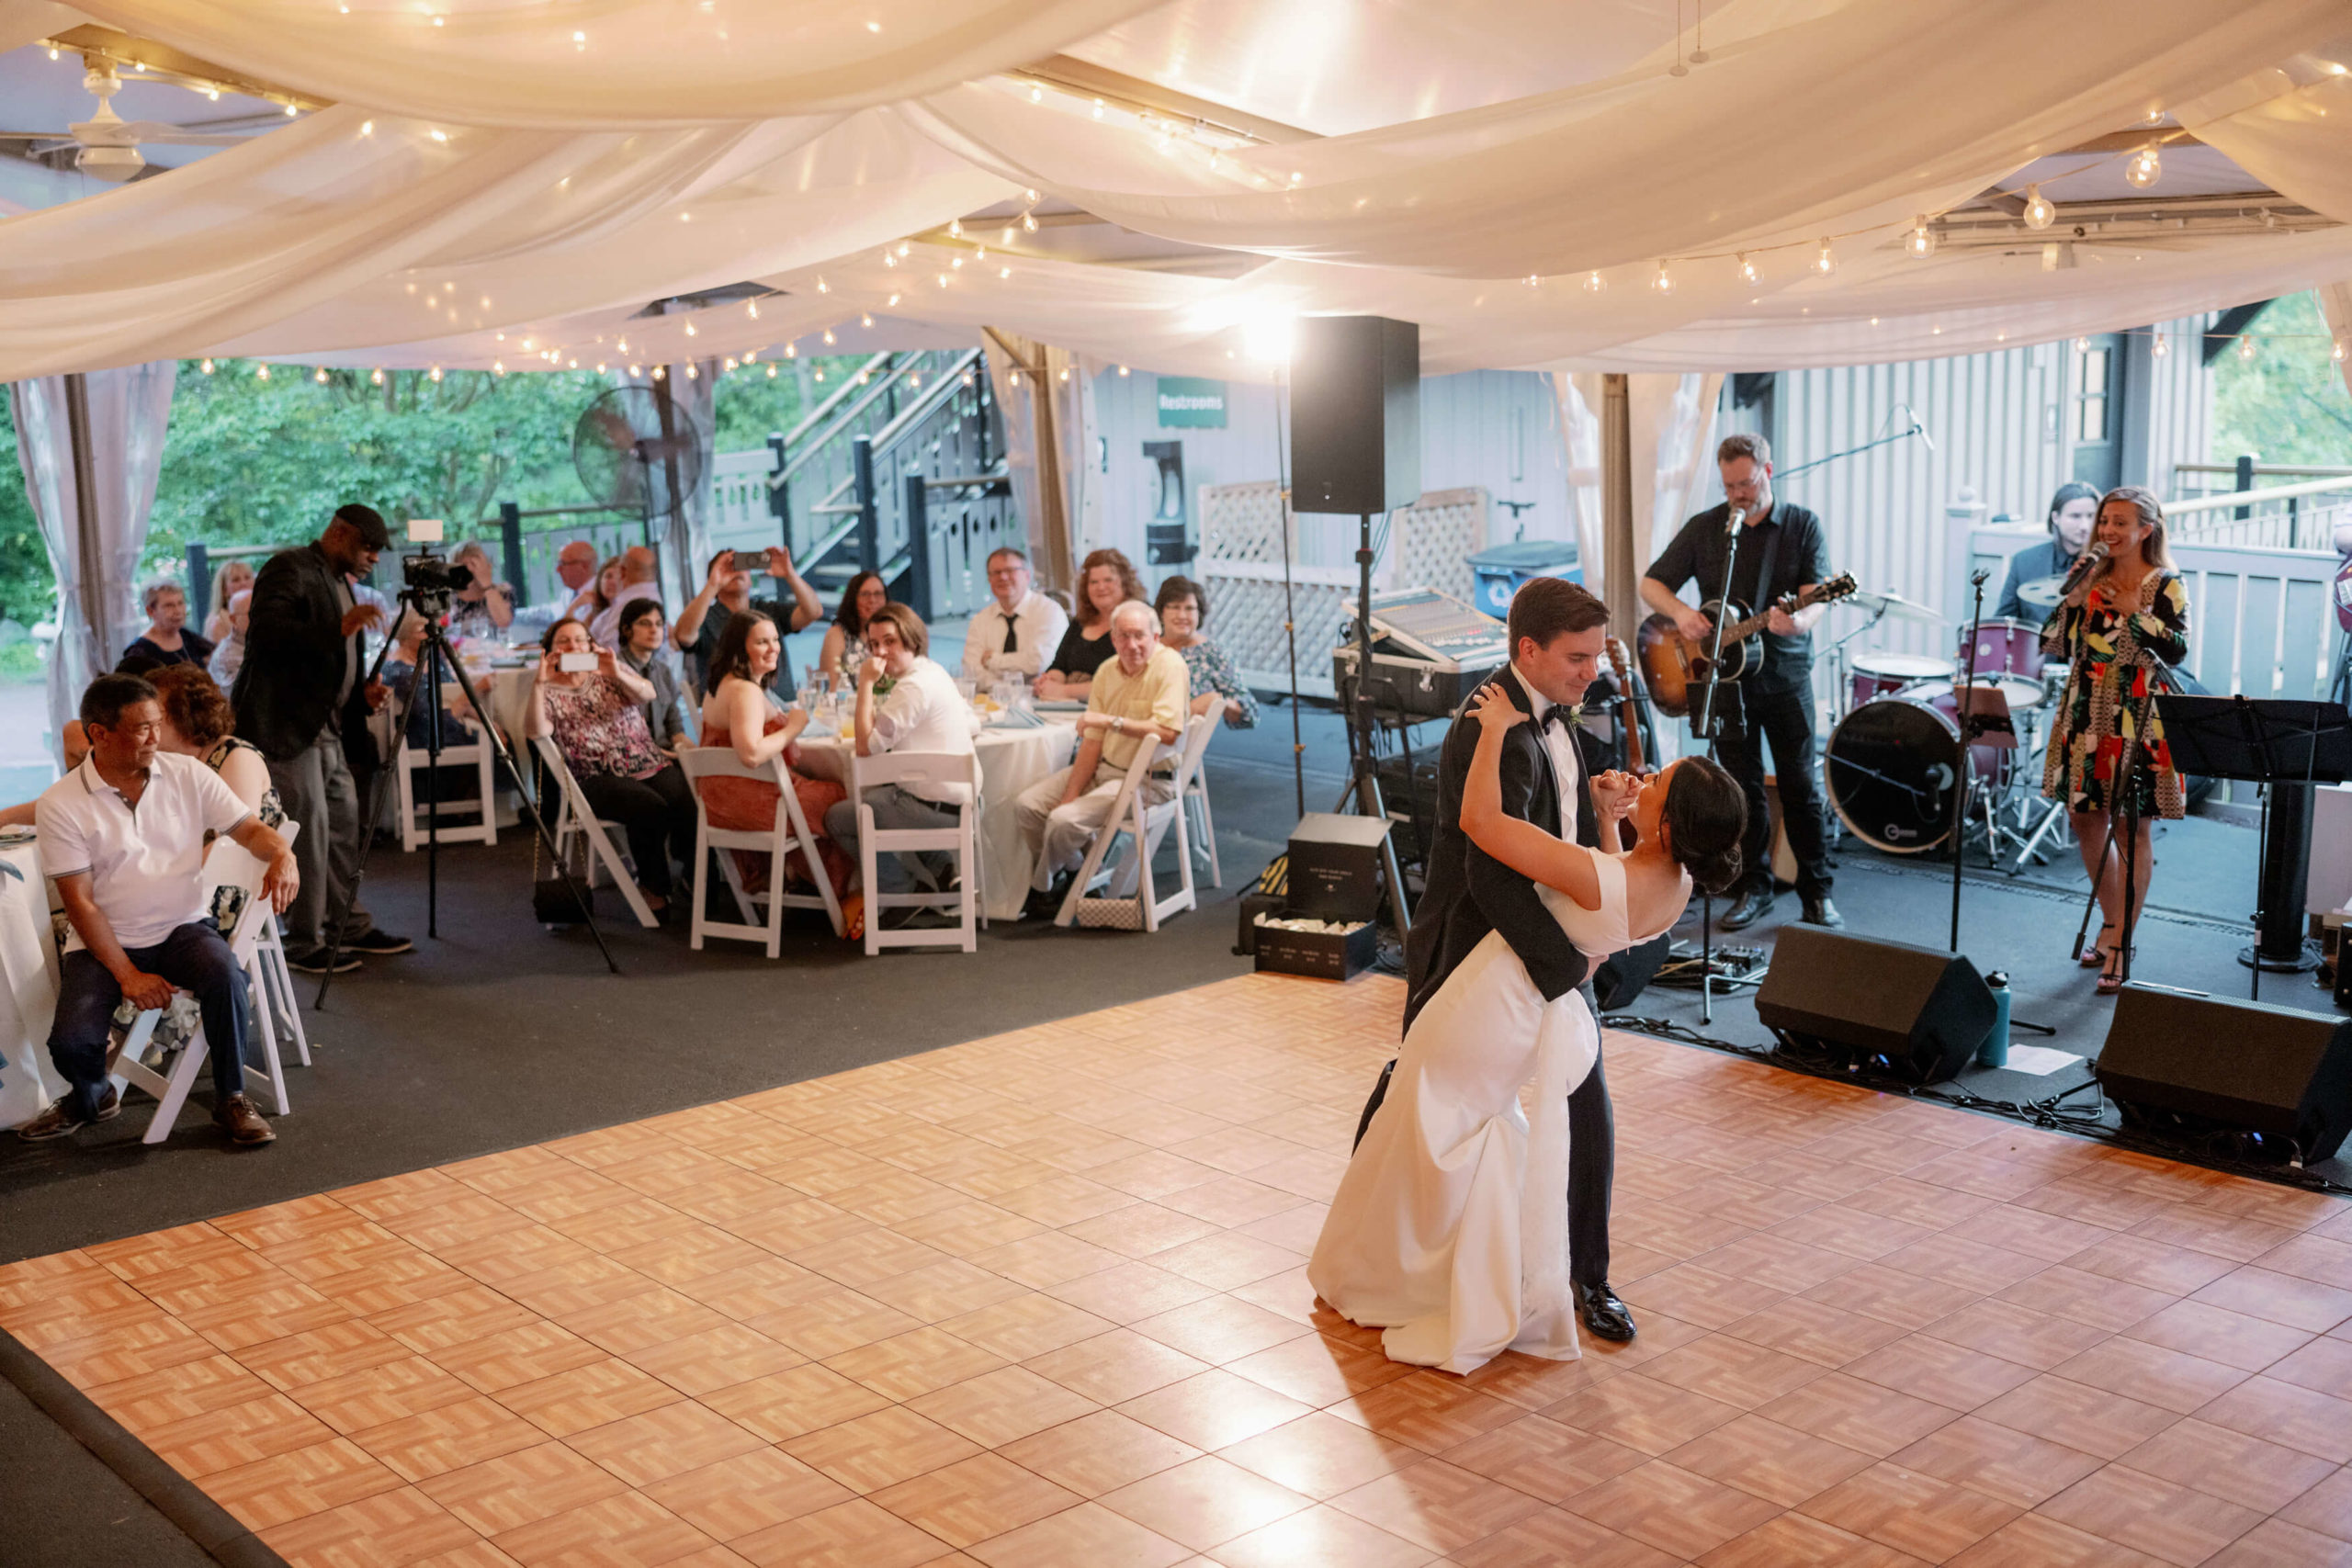 The bride and groom are dancing on the dance floor as the guests watch and the band play. Destination wedding image by Jenny Fu Studio